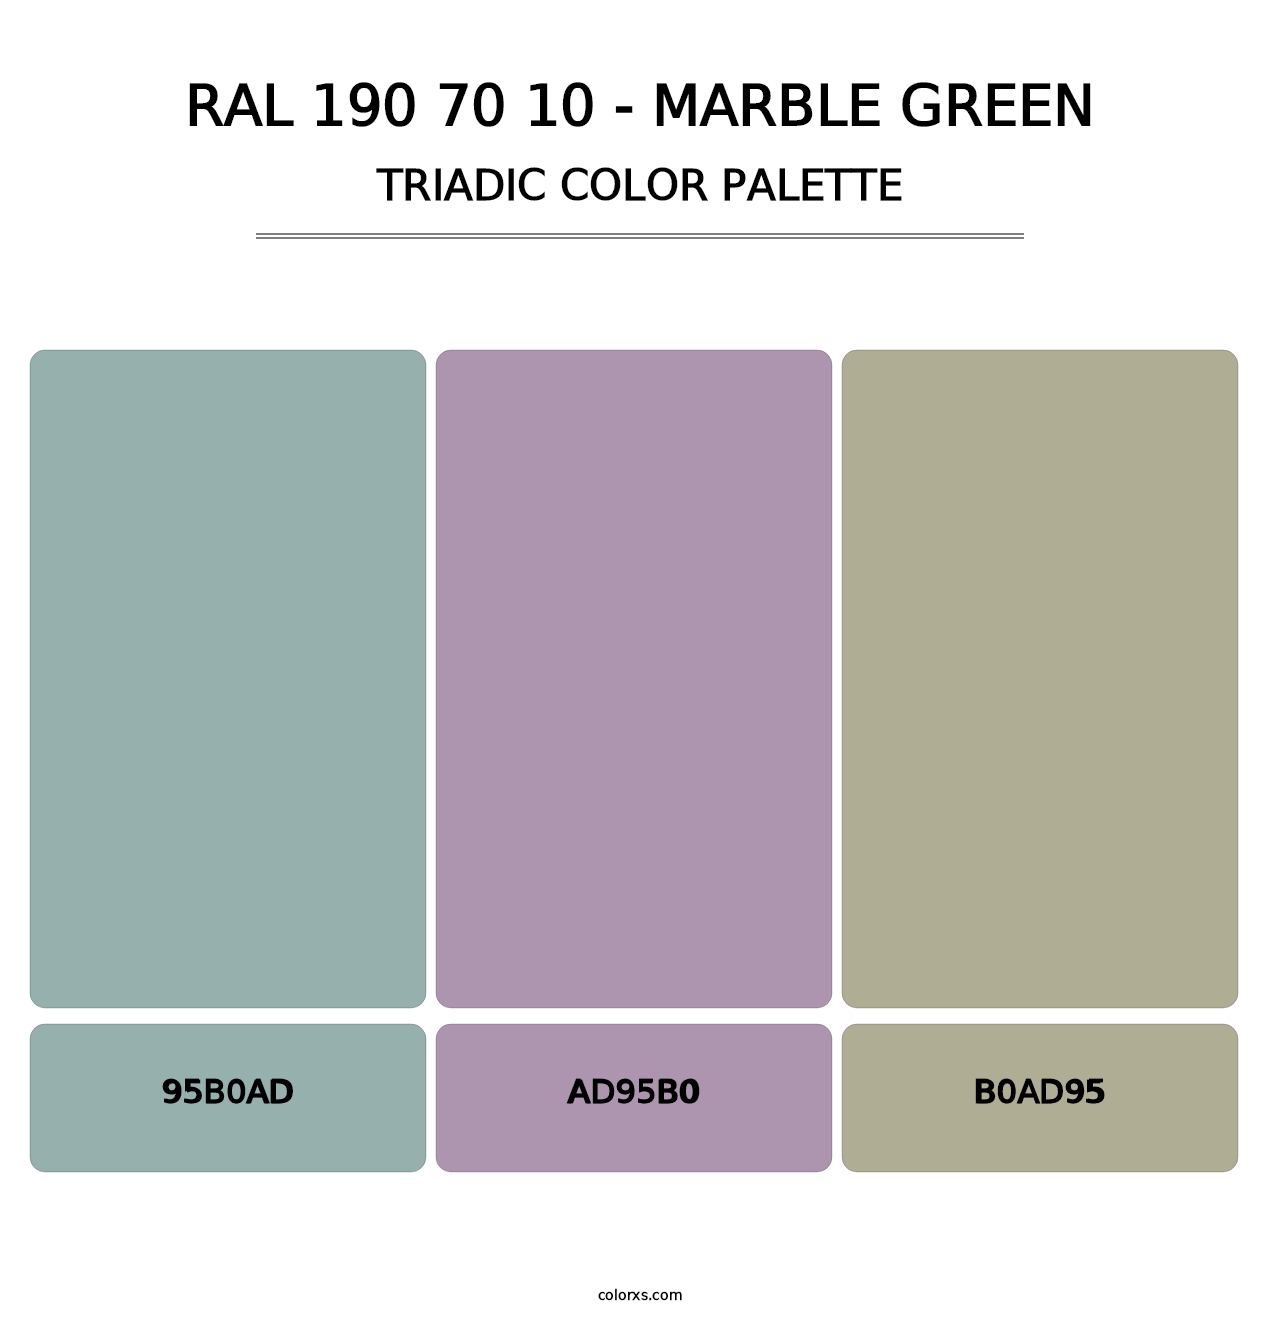 RAL 190 70 10 - Marble Green - Triadic Color Palette